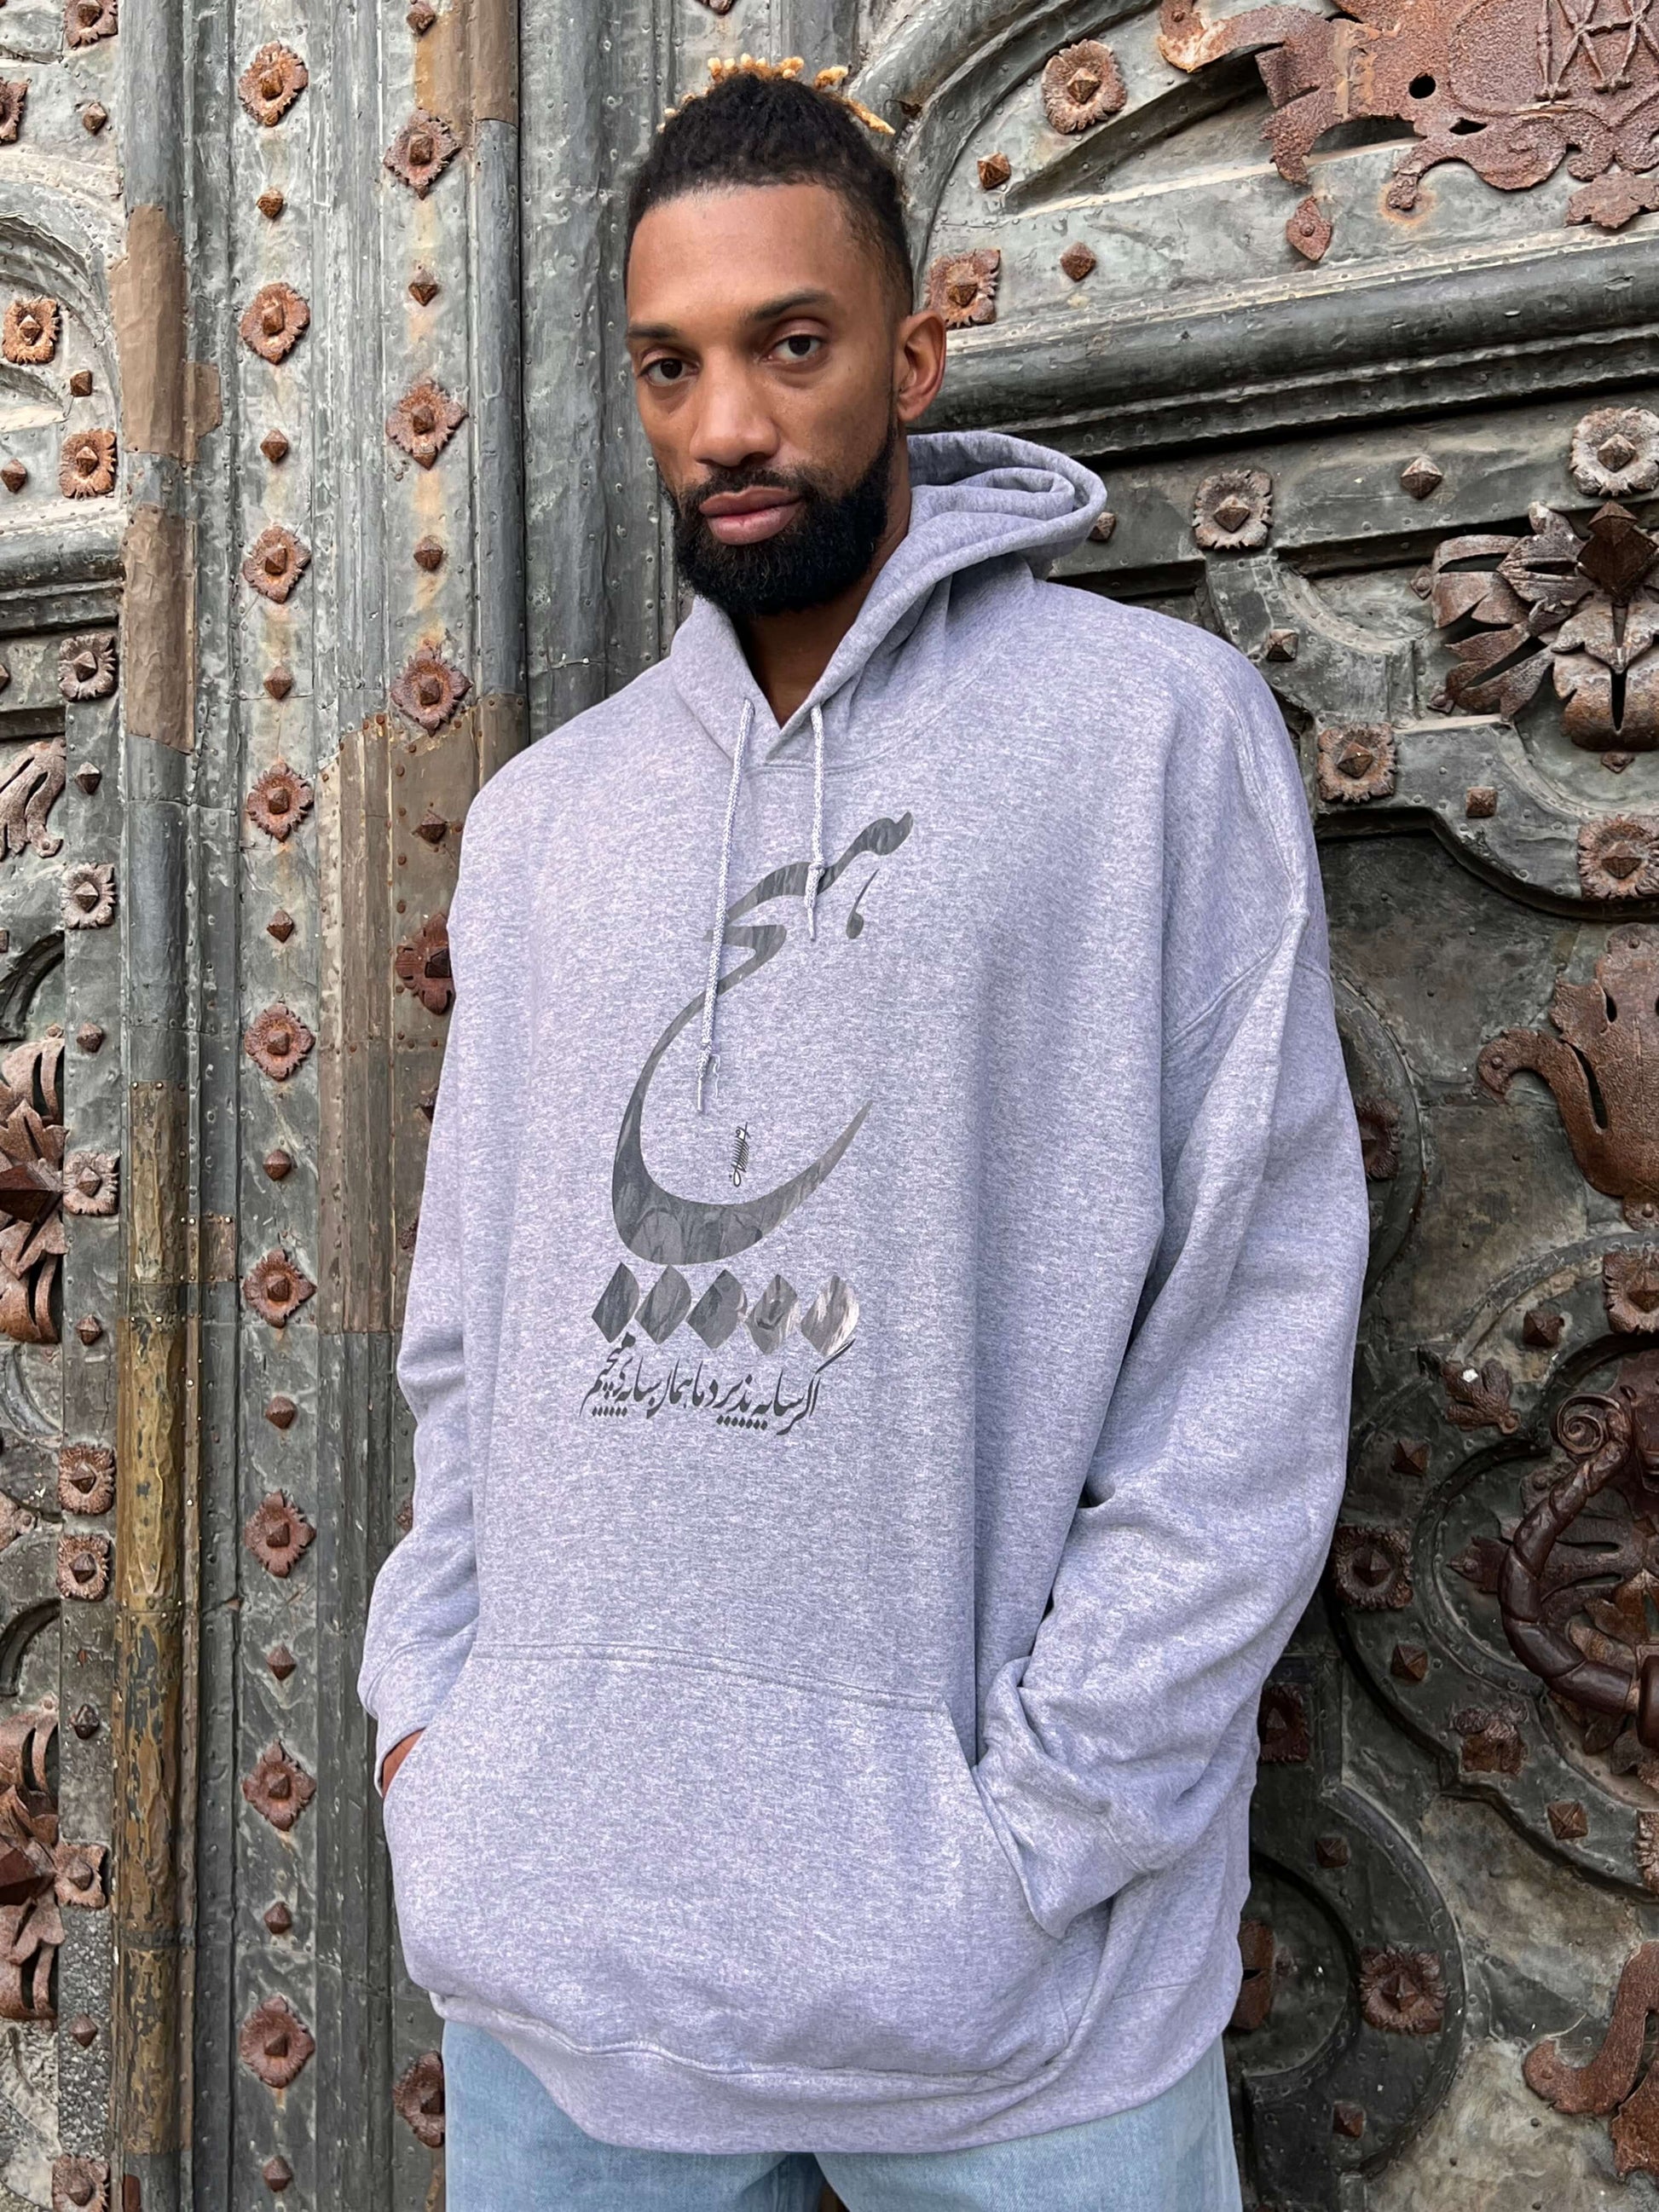 Khem Birch is wearing Persian-inspired hoodie with the word "هیچ" (nothing) emblazoned.